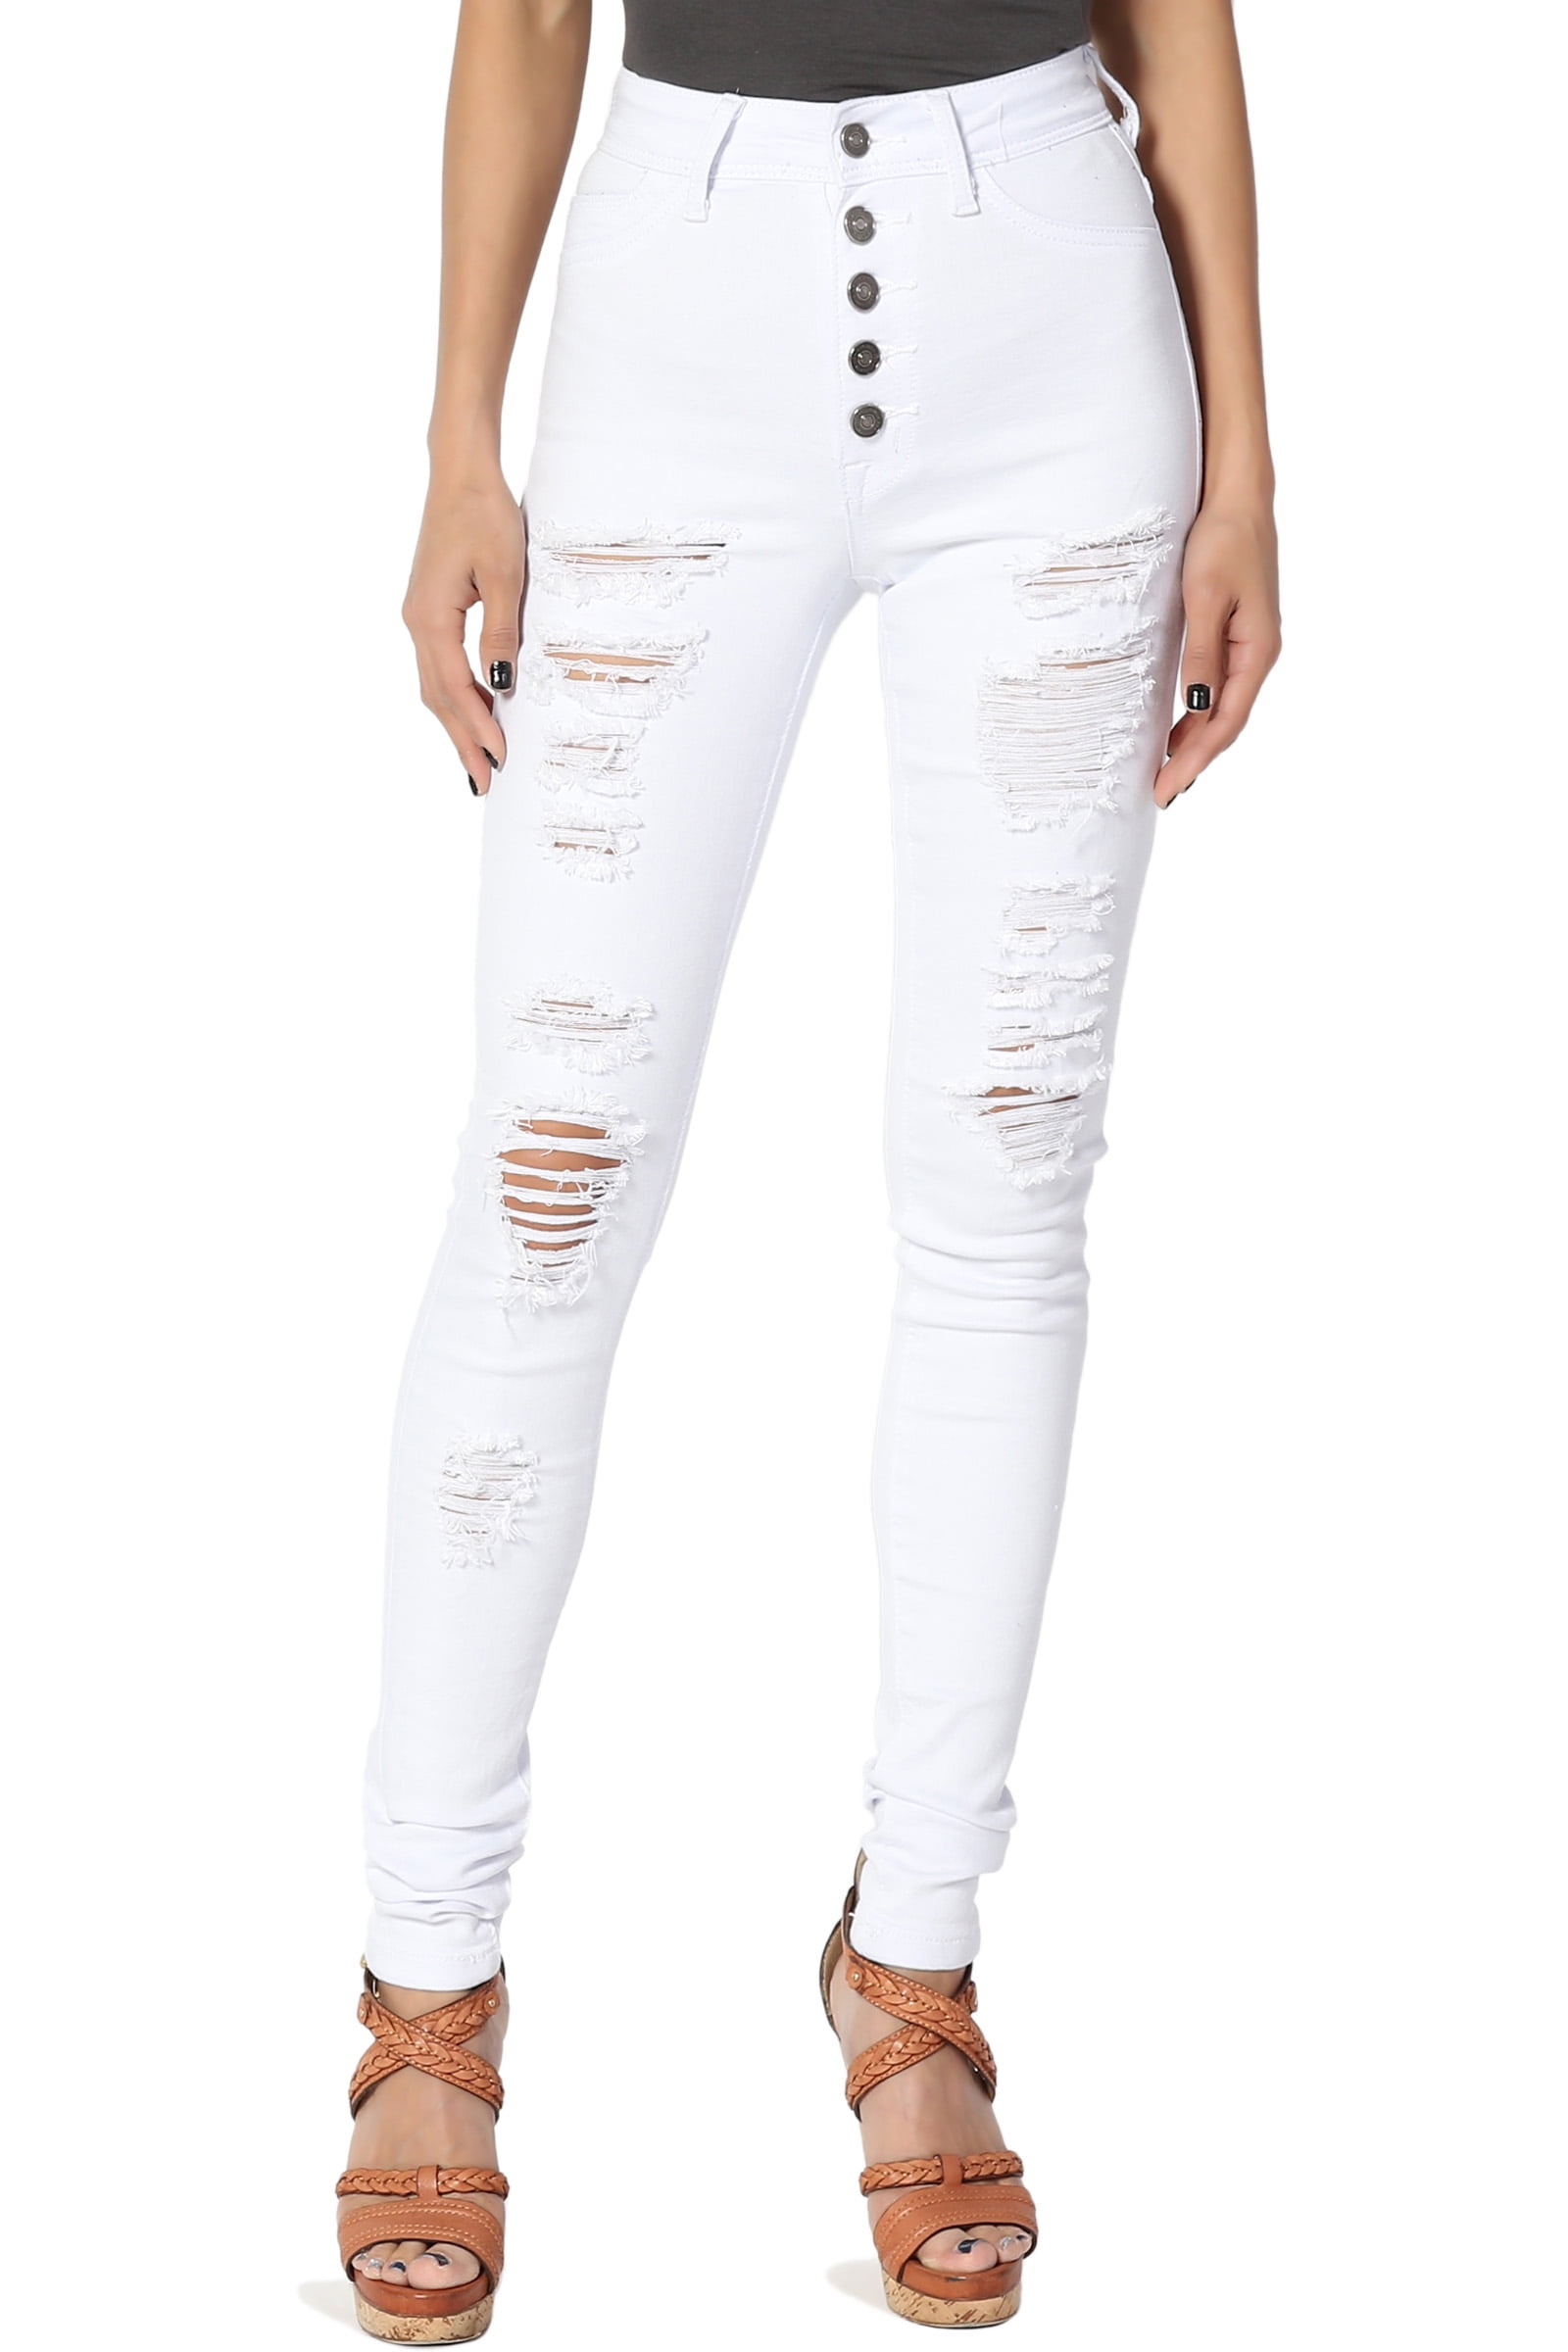 ripped high waisted white jeans